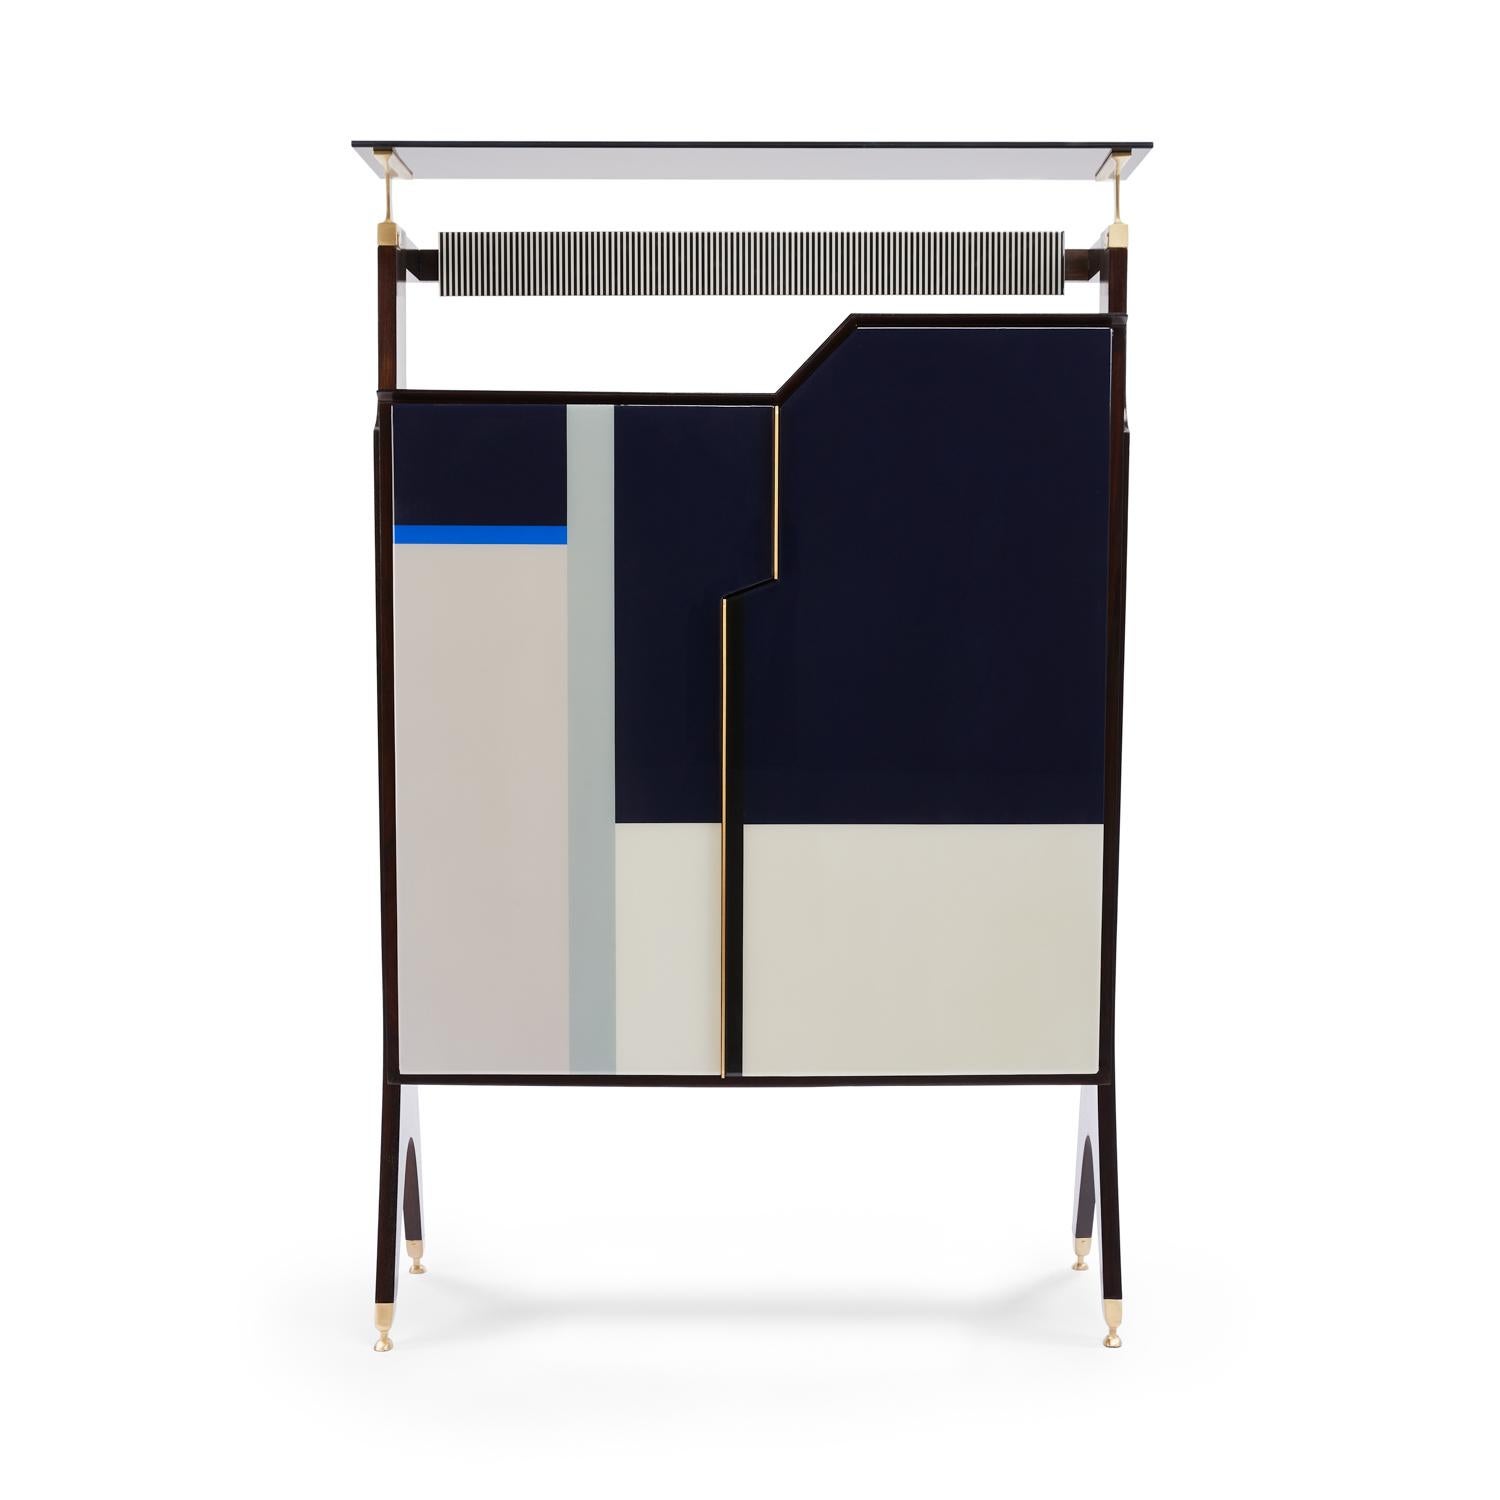 Baxter Jonas cabinet 1950s inspired in dark stained rosewood finish with multi-toned neo-plasticism geometry facade by Draga & Aurel

Designed by Draga & Aurel Salone 2018
Measures: 70 x 43 x 100 H cm 1950s inspired 1950s. Made in Italy.